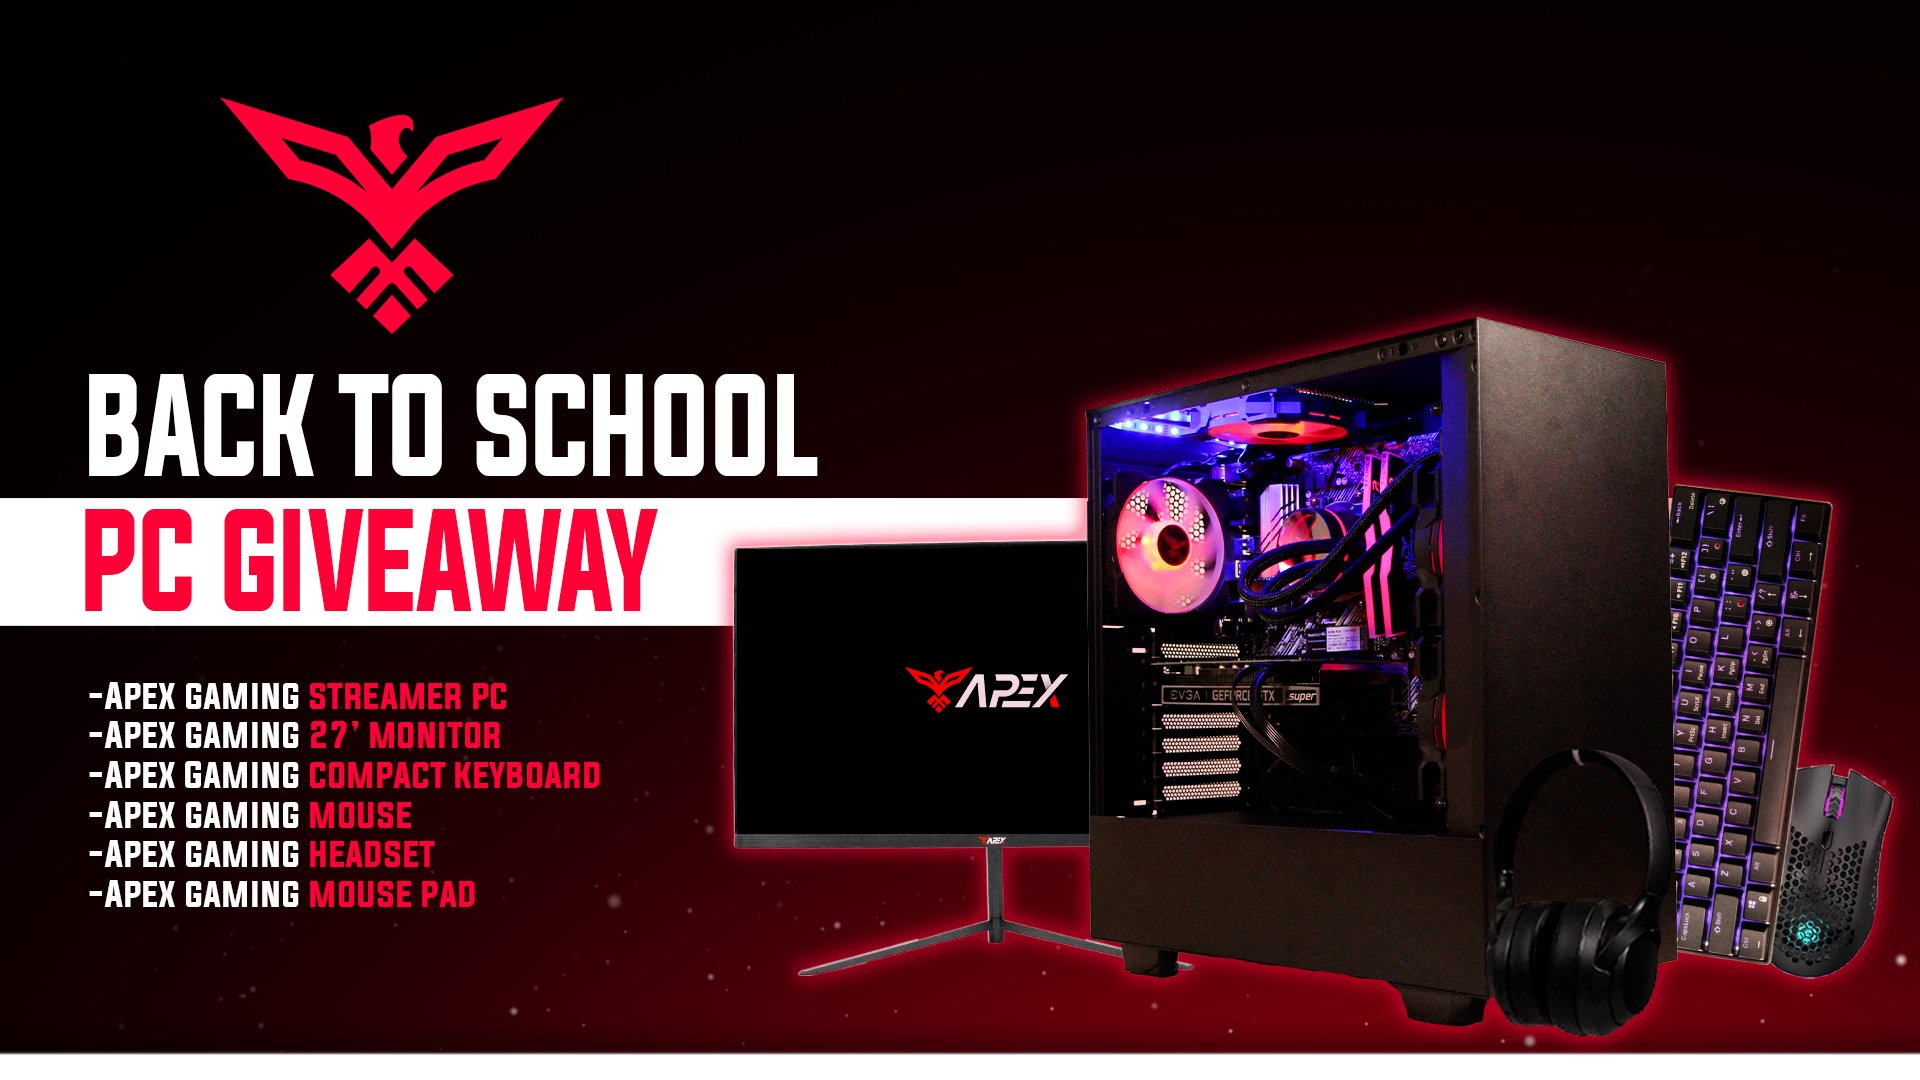 Apex Gaming PCs on Twitter: "Enter our global #BackToSchool giveaway for a chance to win a $2500 setup. Follow, like, RT sign up through gleam to be entered! Best of